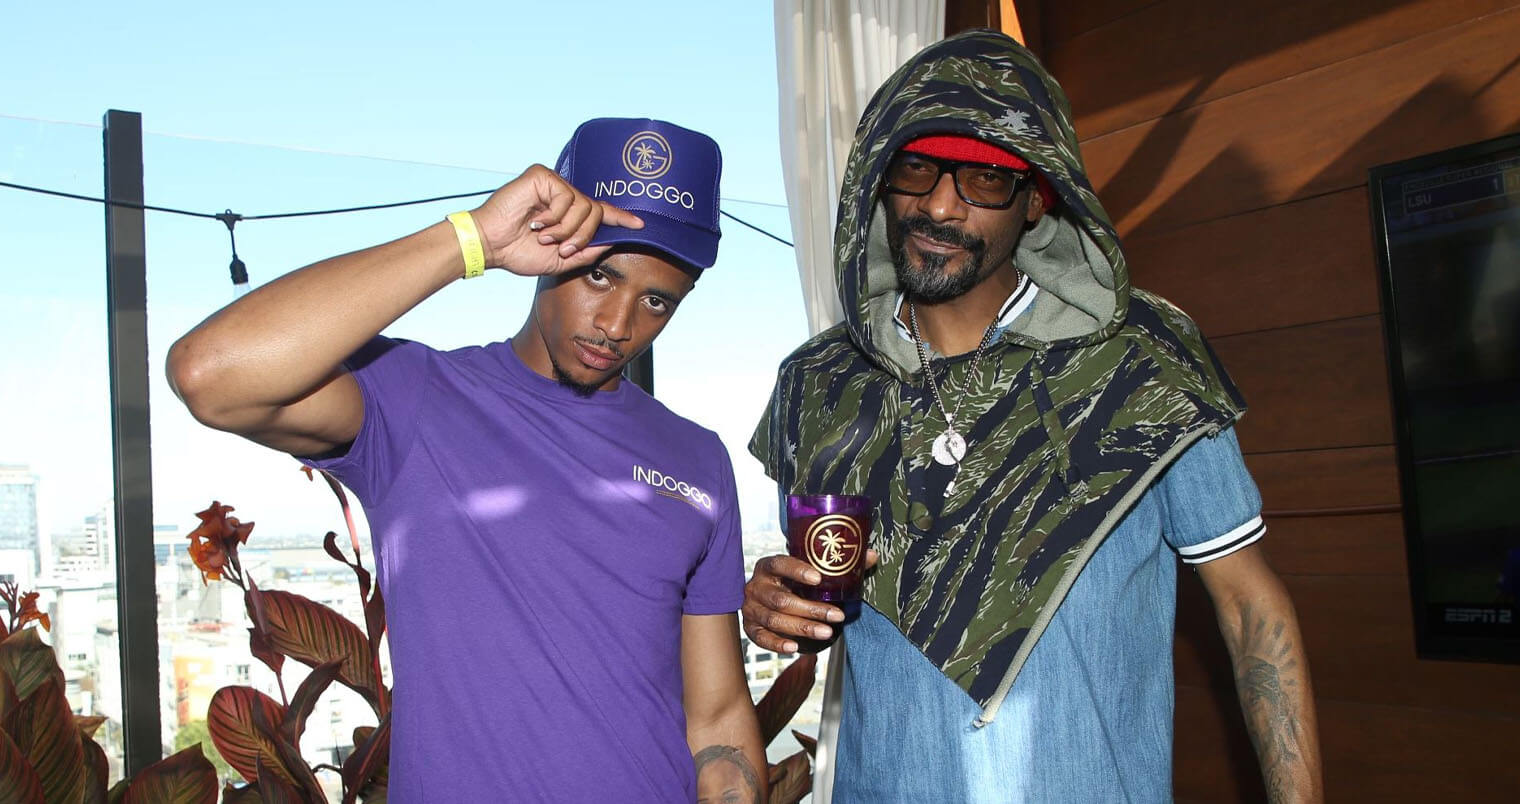 The King of Gin N Juice, Snoop Dogg & son Cordell Celebrate World Gin Day with his very own INDOGGO® Gin inside the INDOGGO® Cabanas featured image